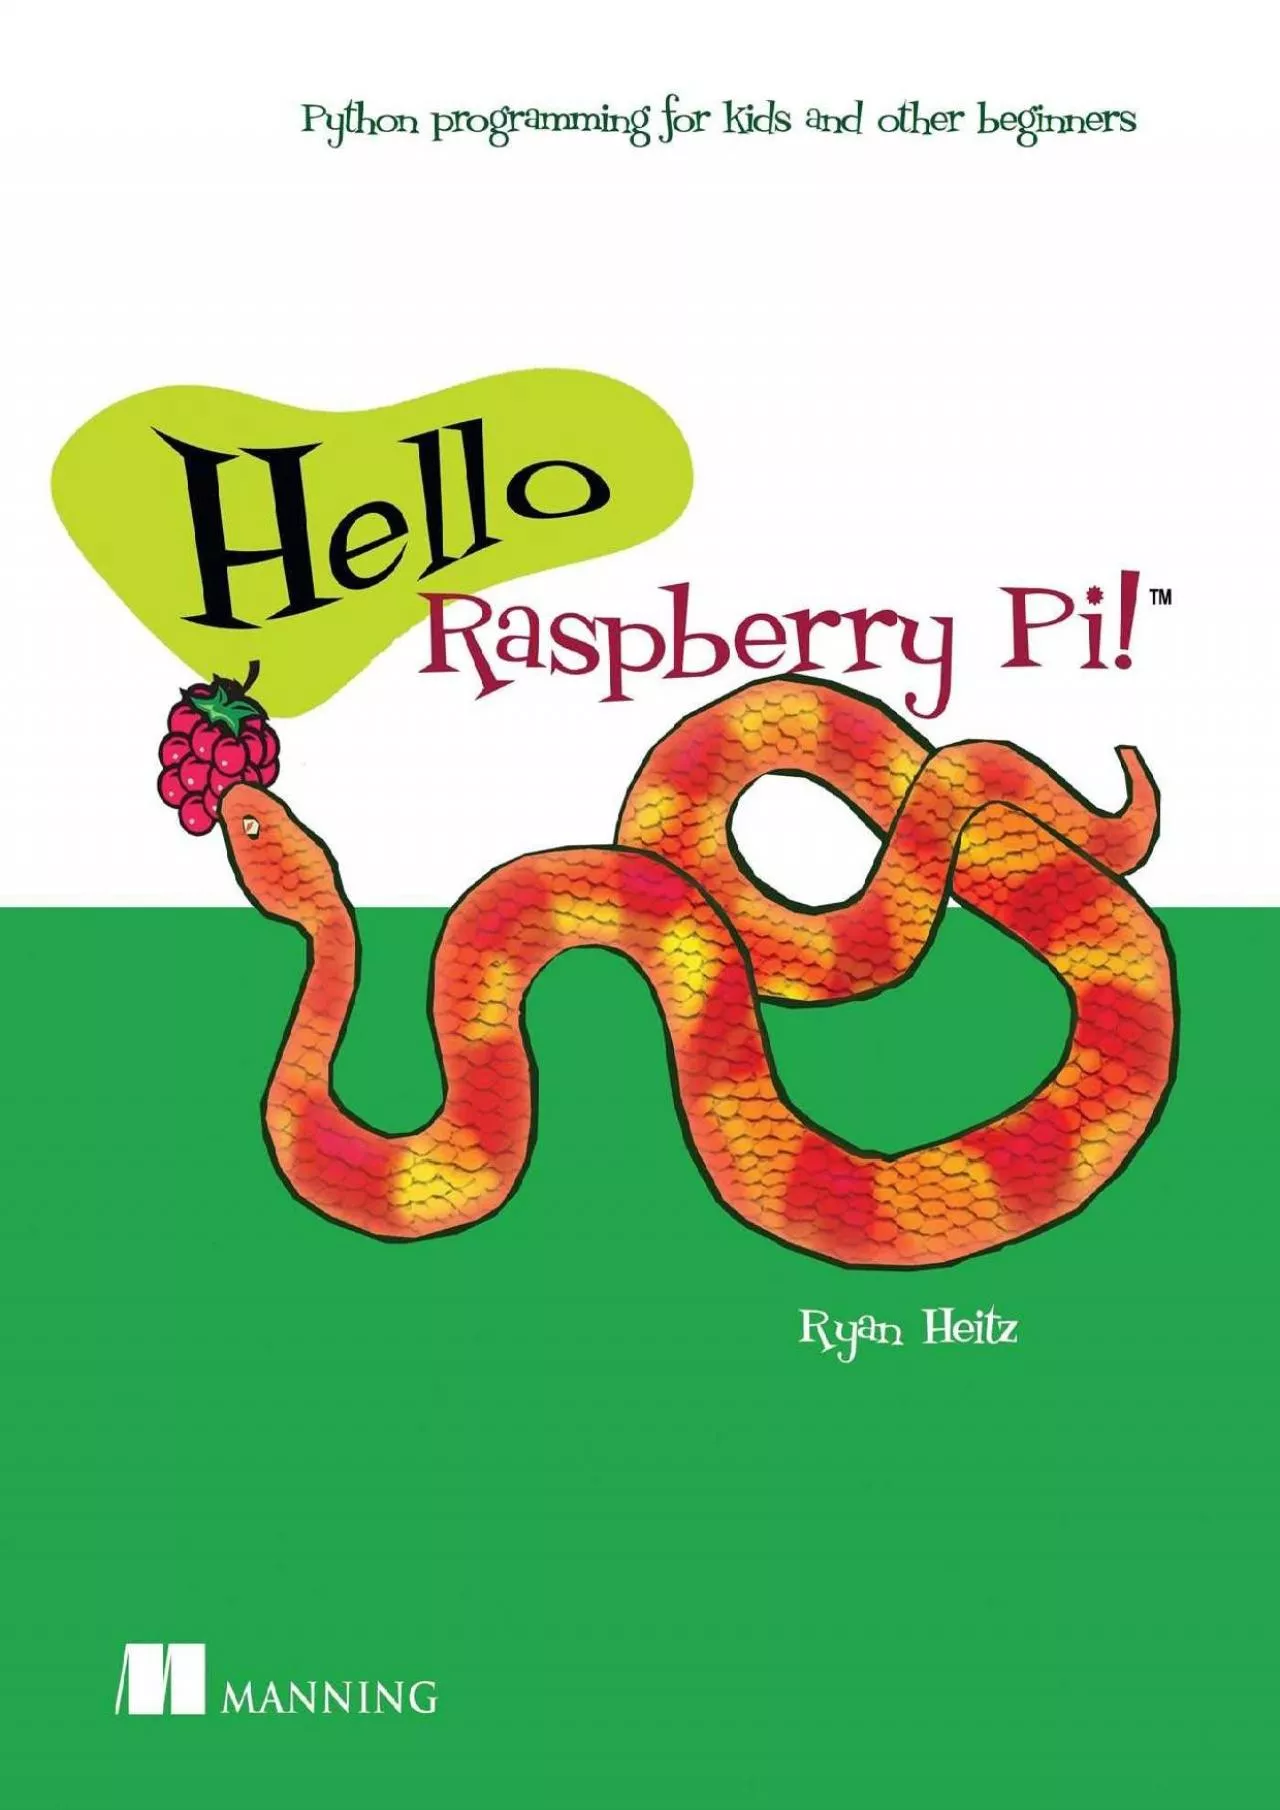 [DOWLOAD]-Hello Raspberry Pi Python programming for kids and other beginners